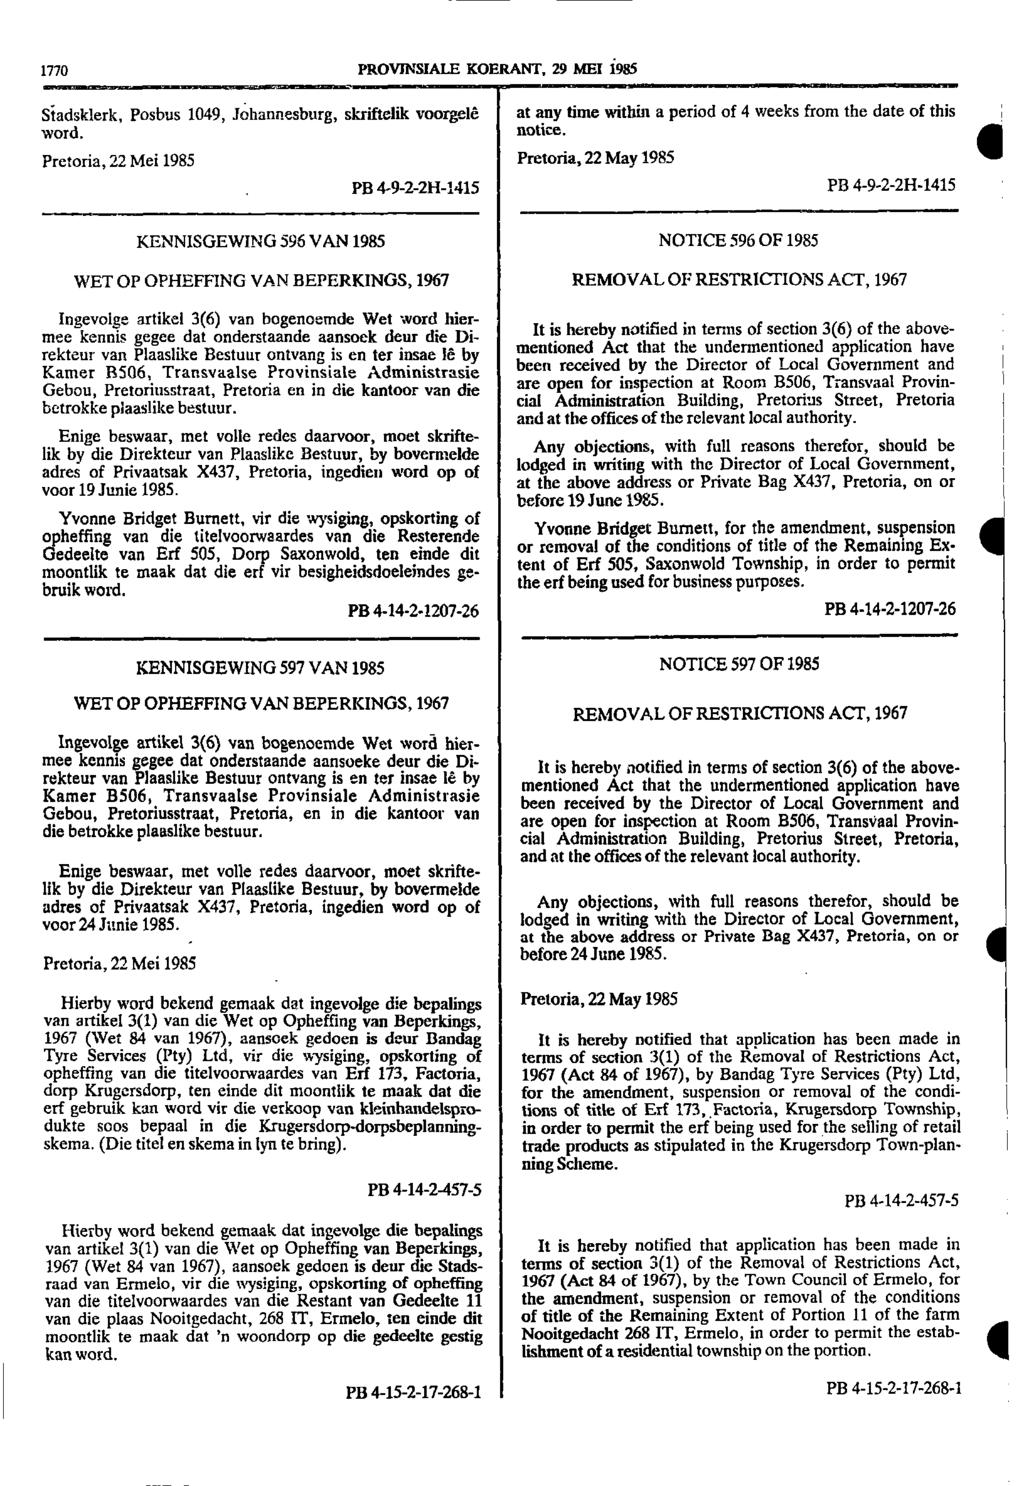 i 1770 PROVJNSALE KOERANT, 29 ME 1985 Stadsklerk, Posbus 1049, Johannesburg, skriftelik voorgele word at any time within a period of 4 weeks from the date of this notice Pretoria, 22 Mei 1985